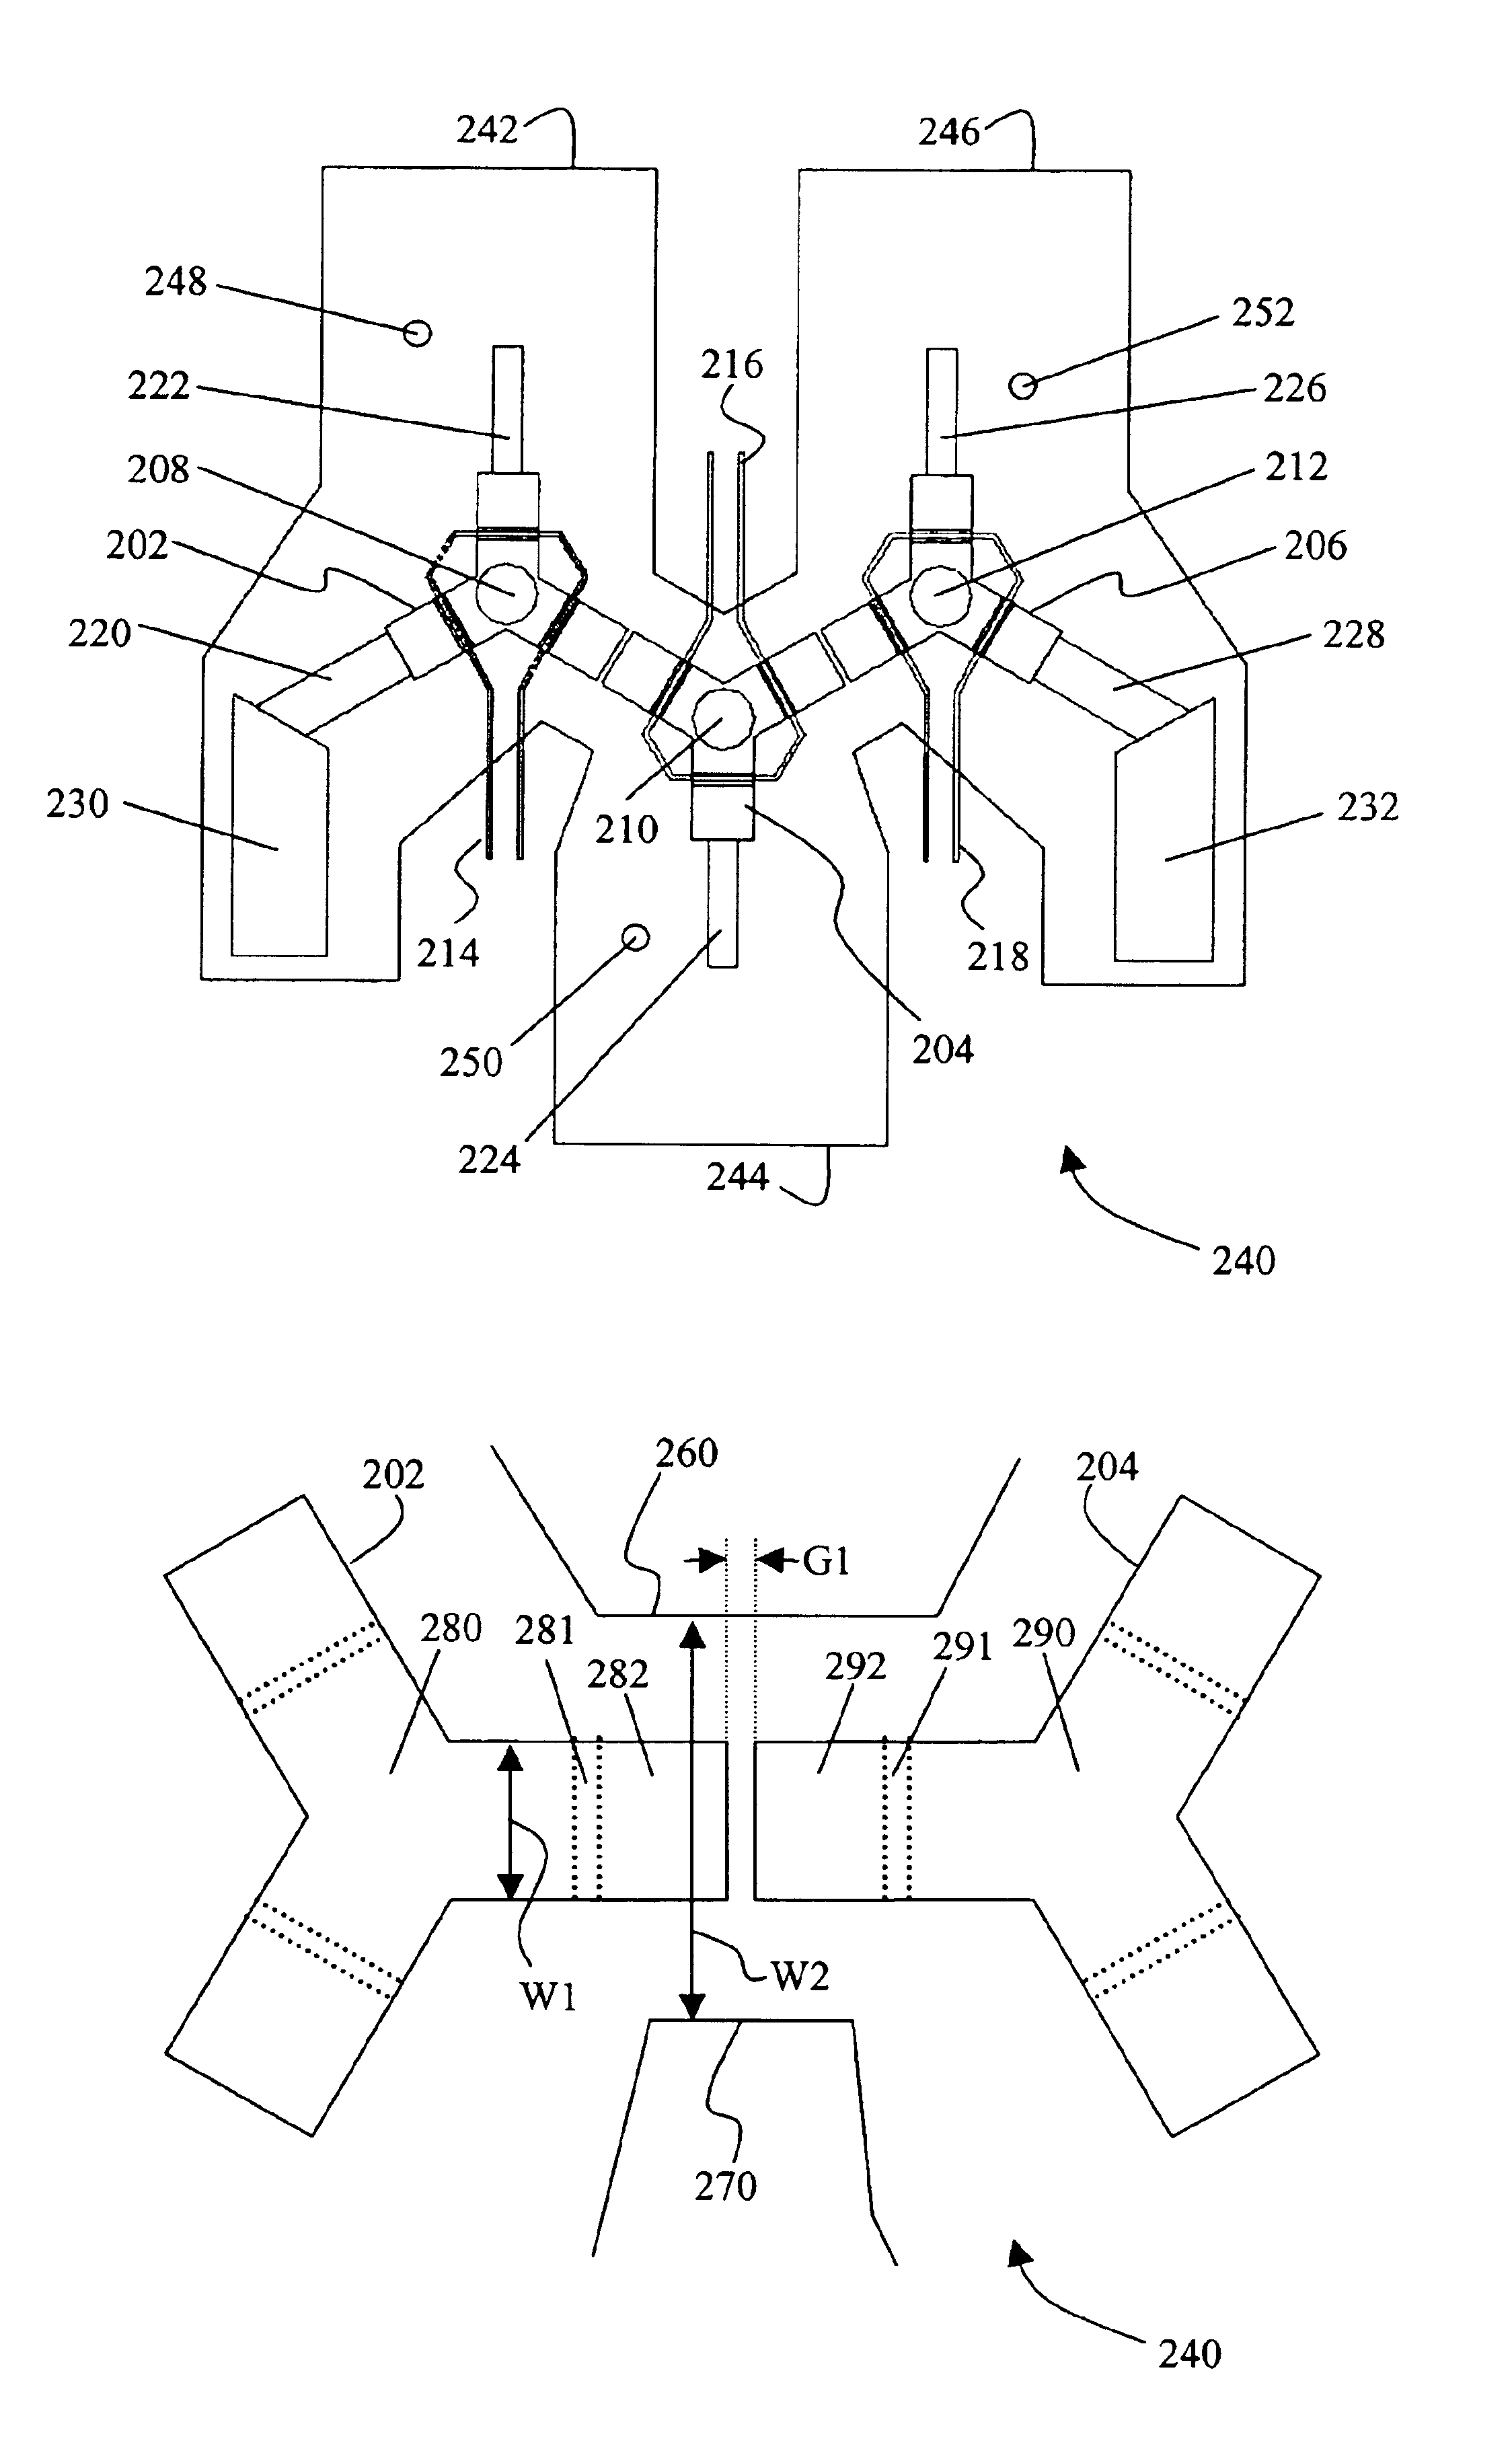 Multi-junction waveguide circulator without internal transitions